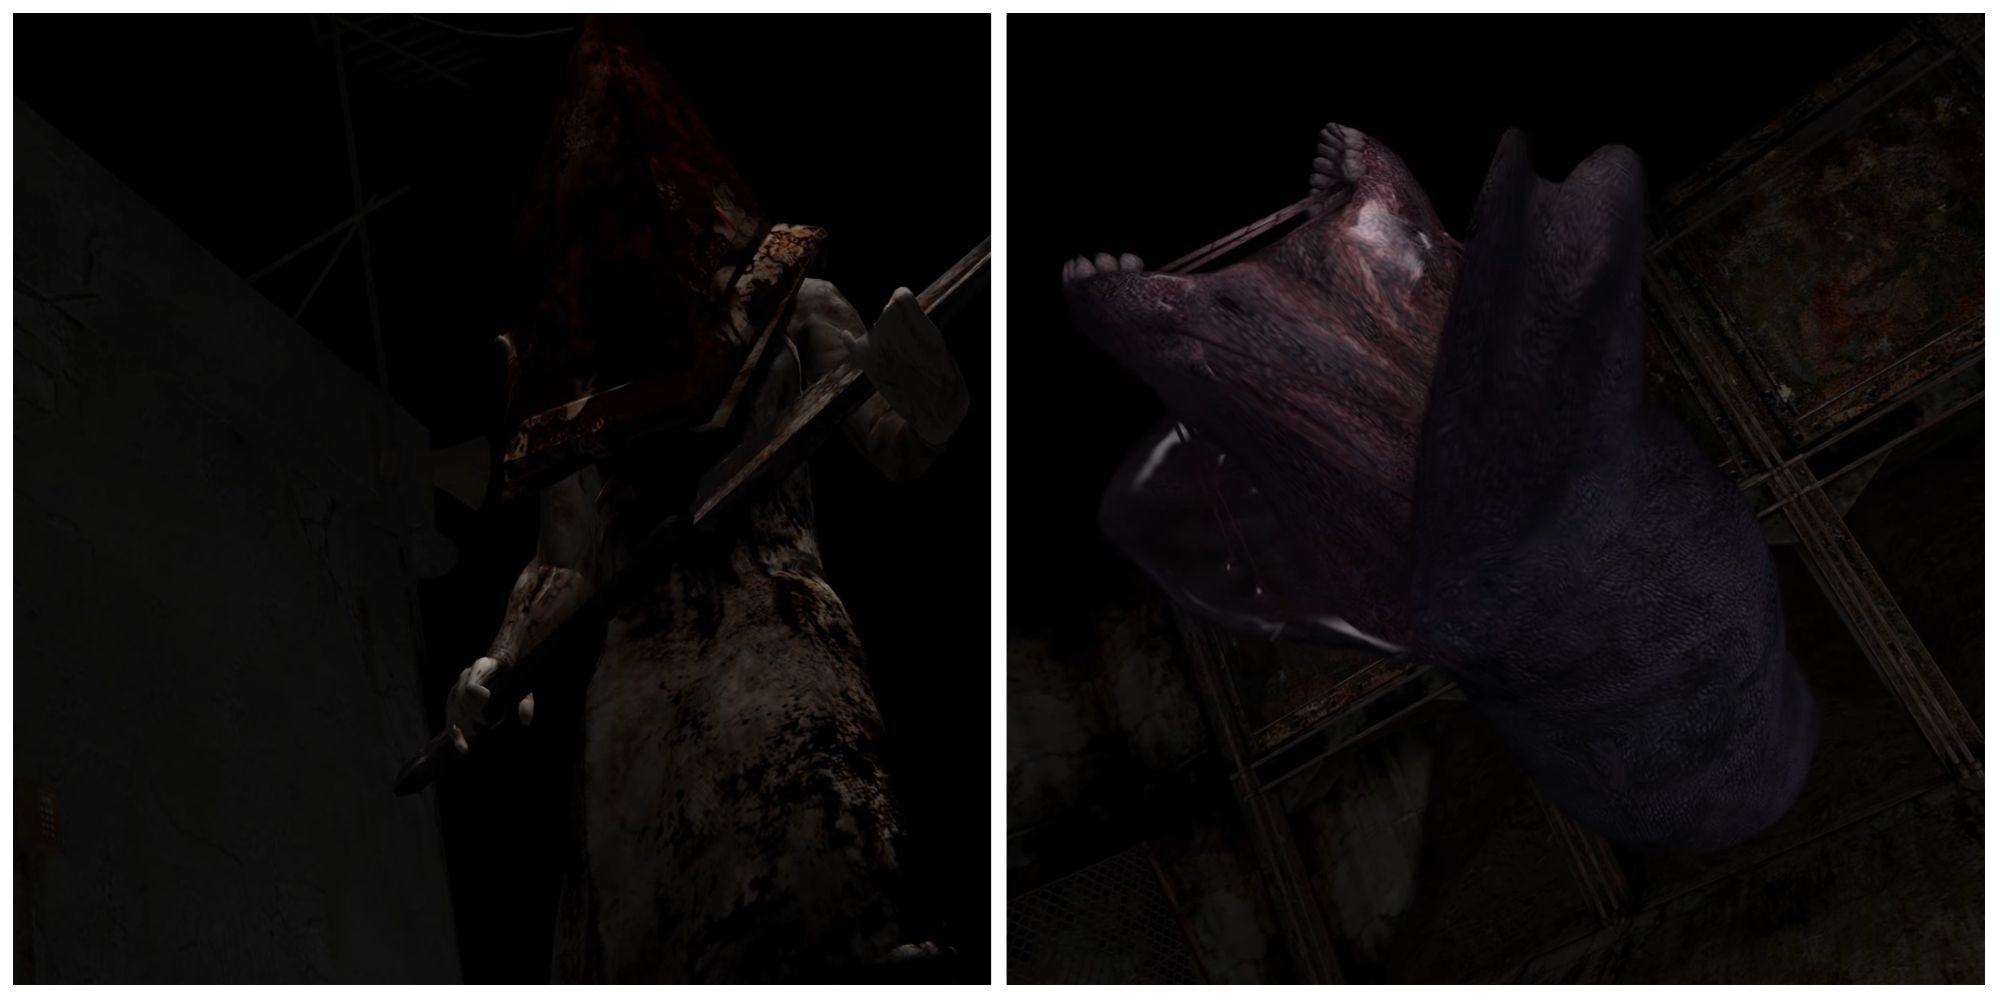 Pyramid Head from Silent Hill 2 and Split Worm from Silent Hill 3.